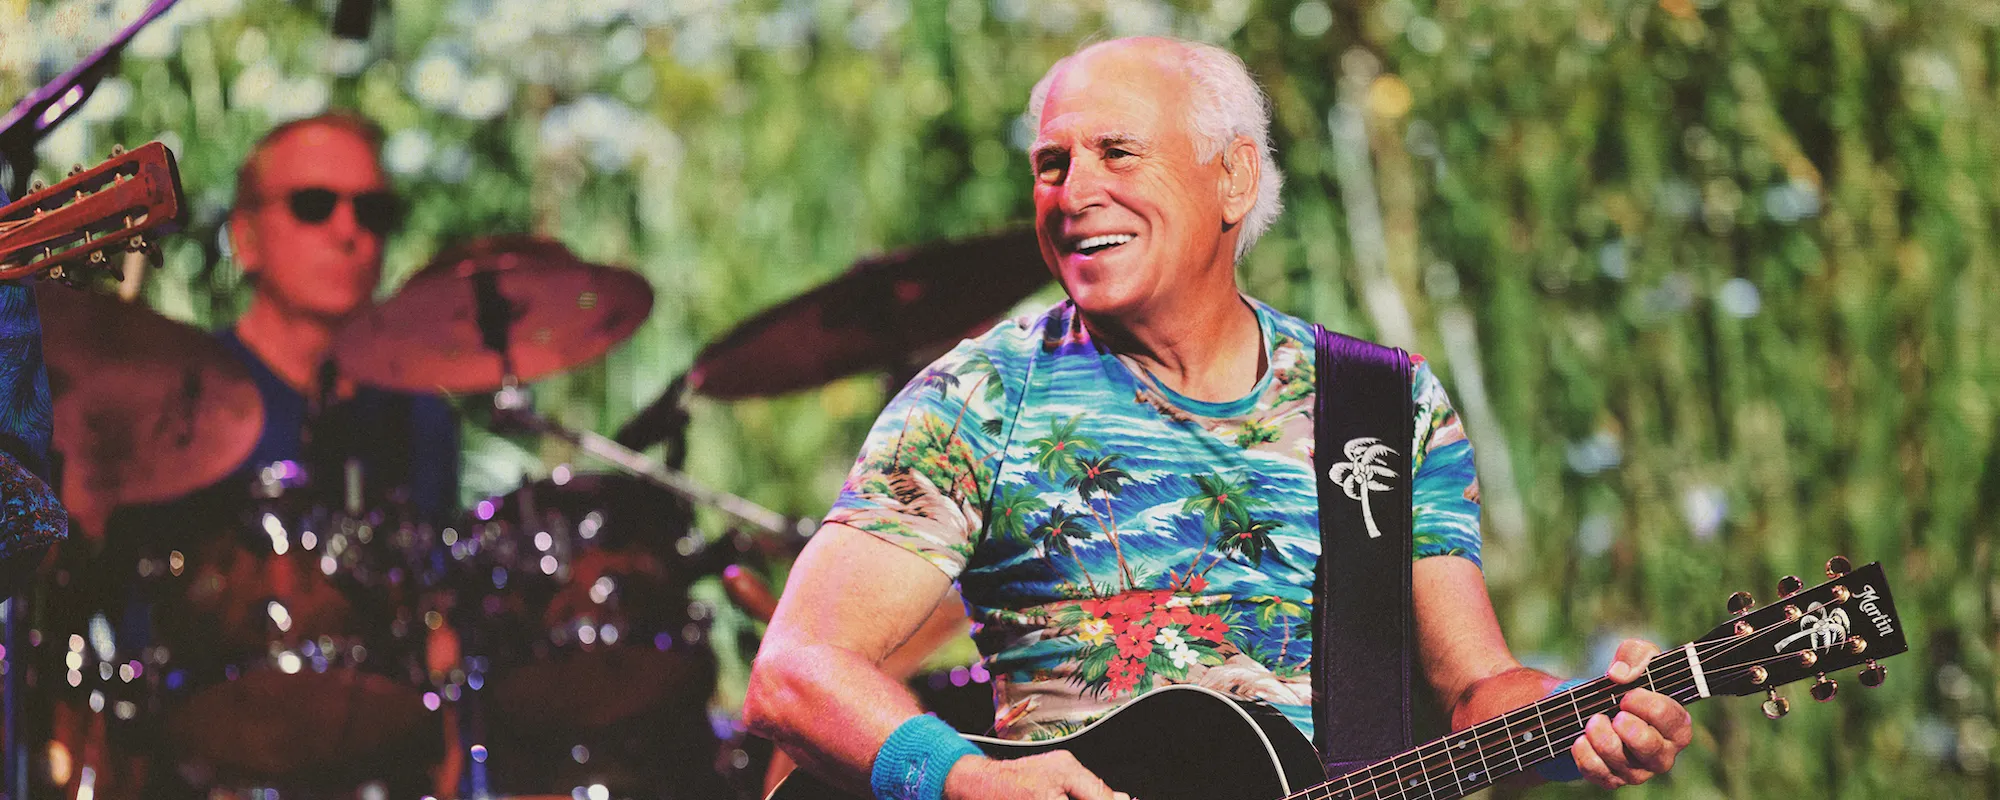 How a Potent Gummie with Paul McCartney, Navy Seal Training, and More Inspired Jimmy Buffett’s Final Album ‘Equal Strain on All Parts’